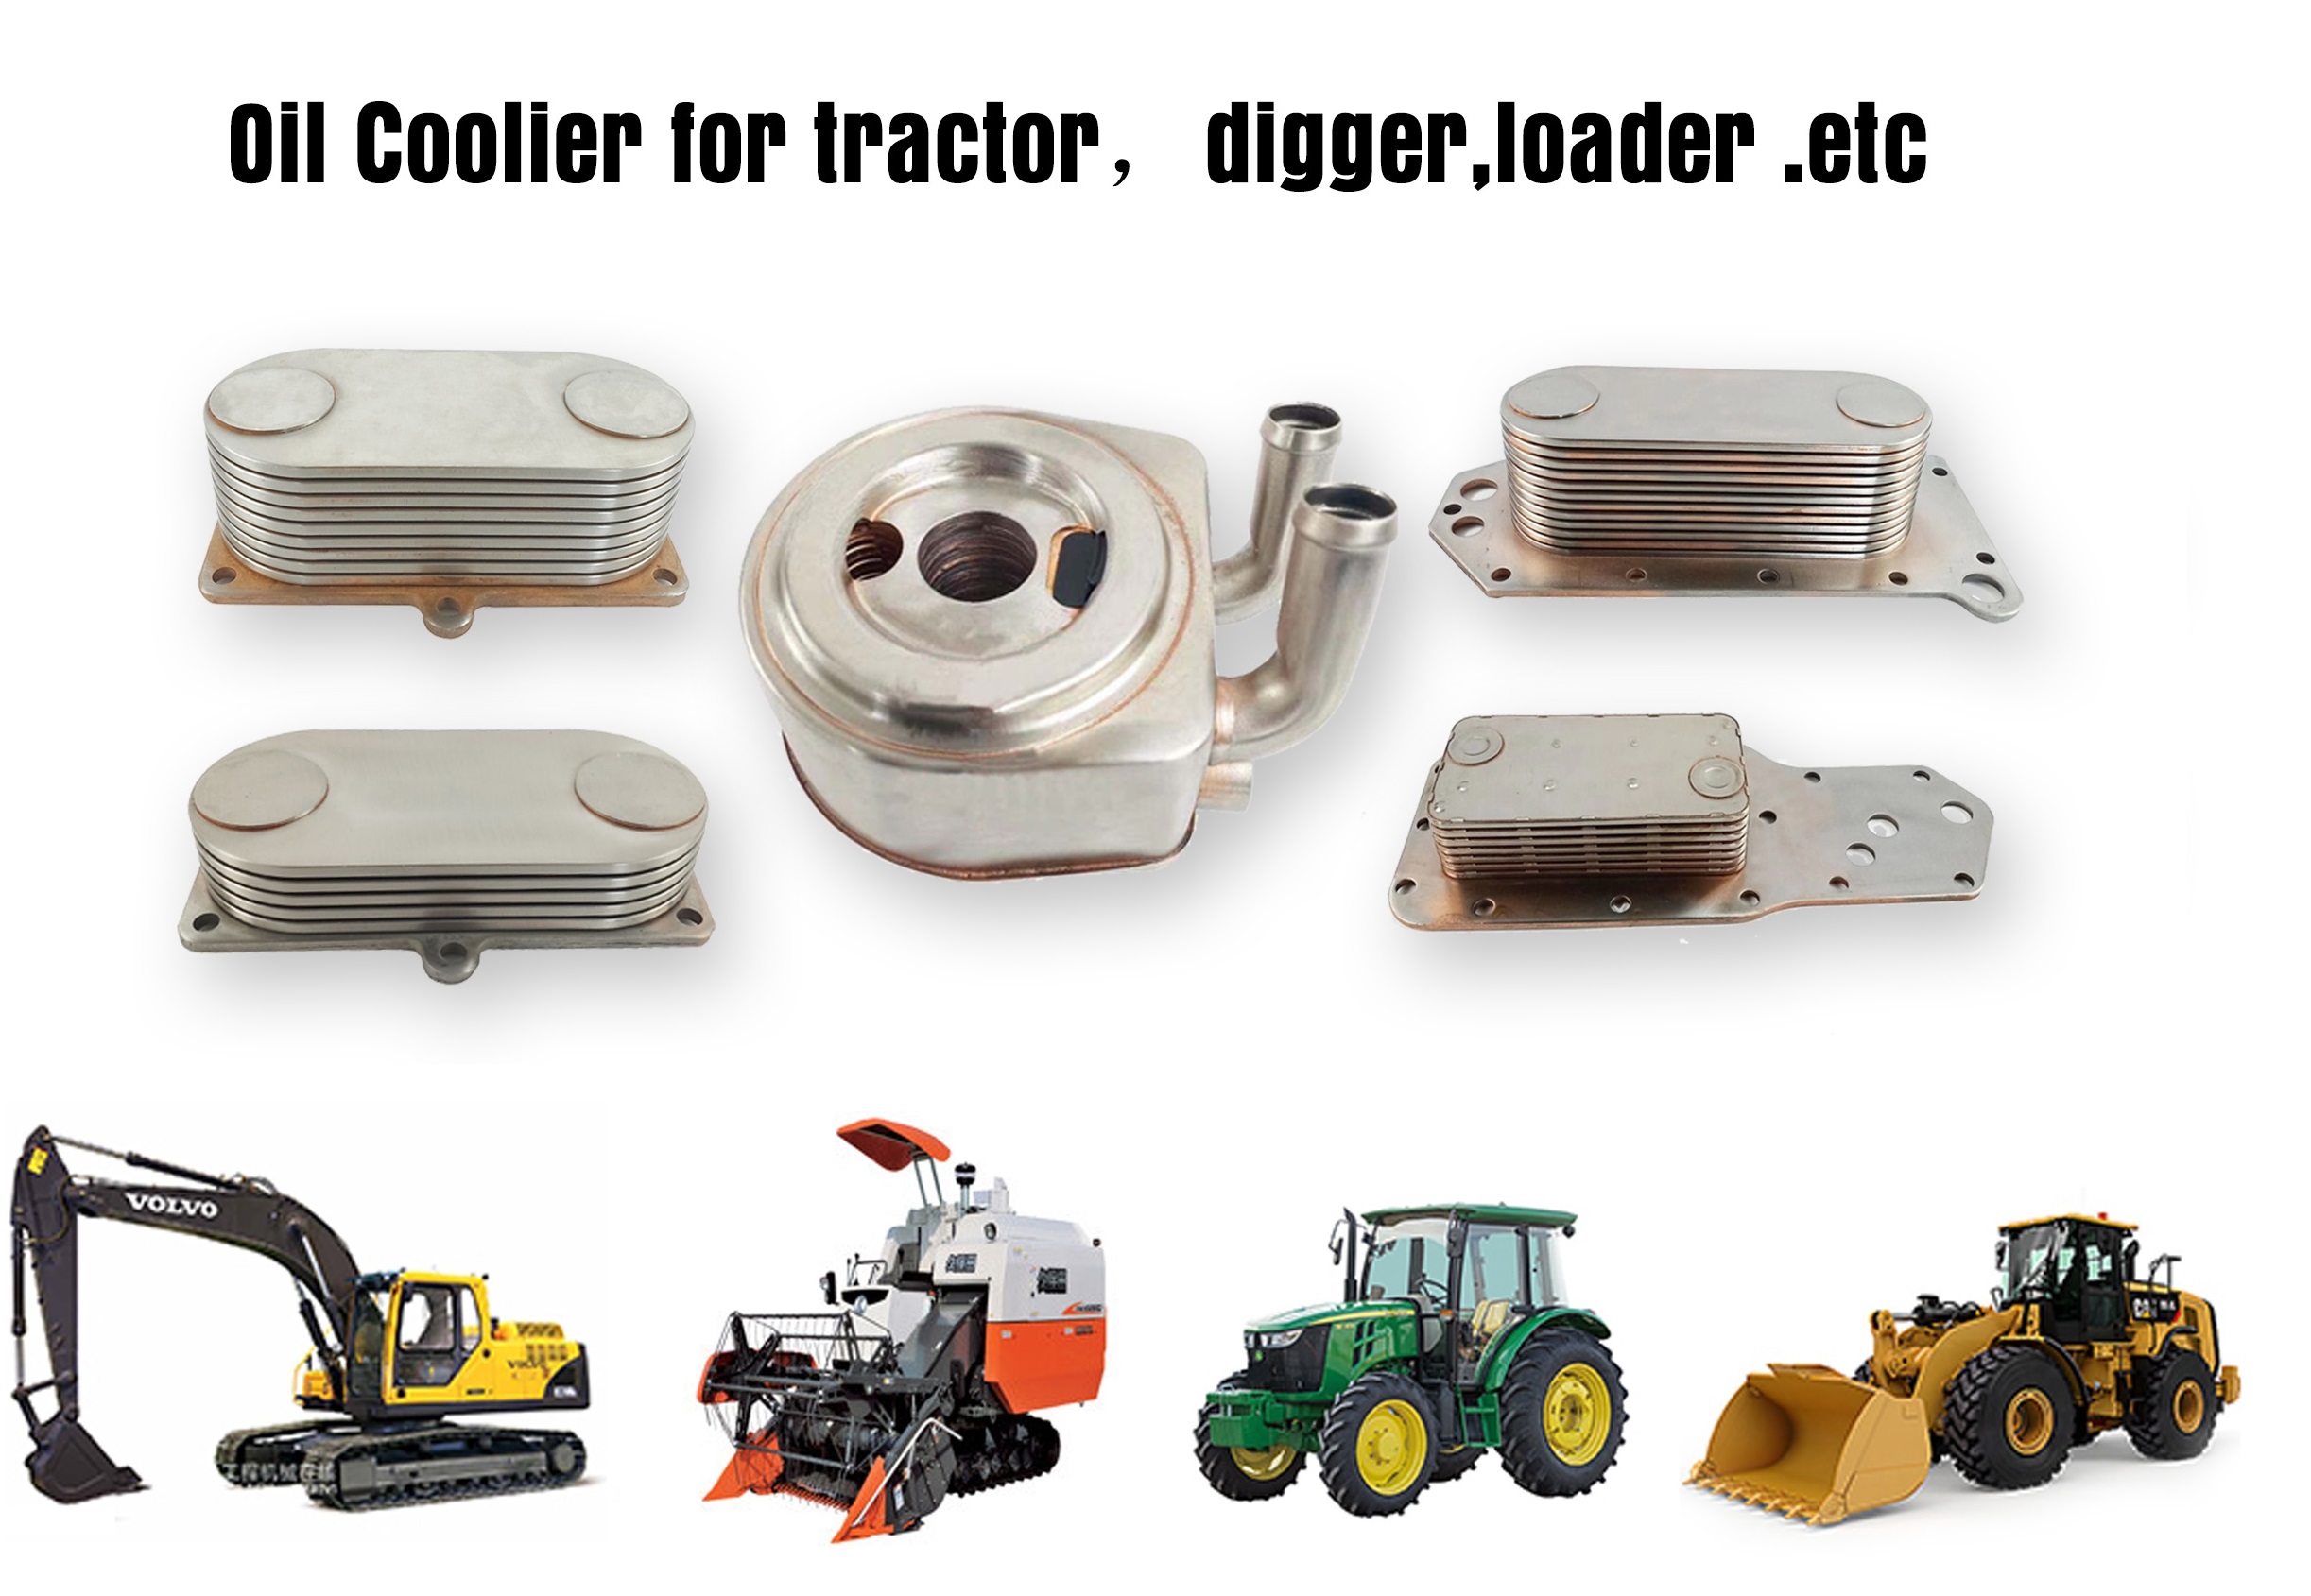 Oil cooler for tractor ,Farm machines, harvesters, etc.